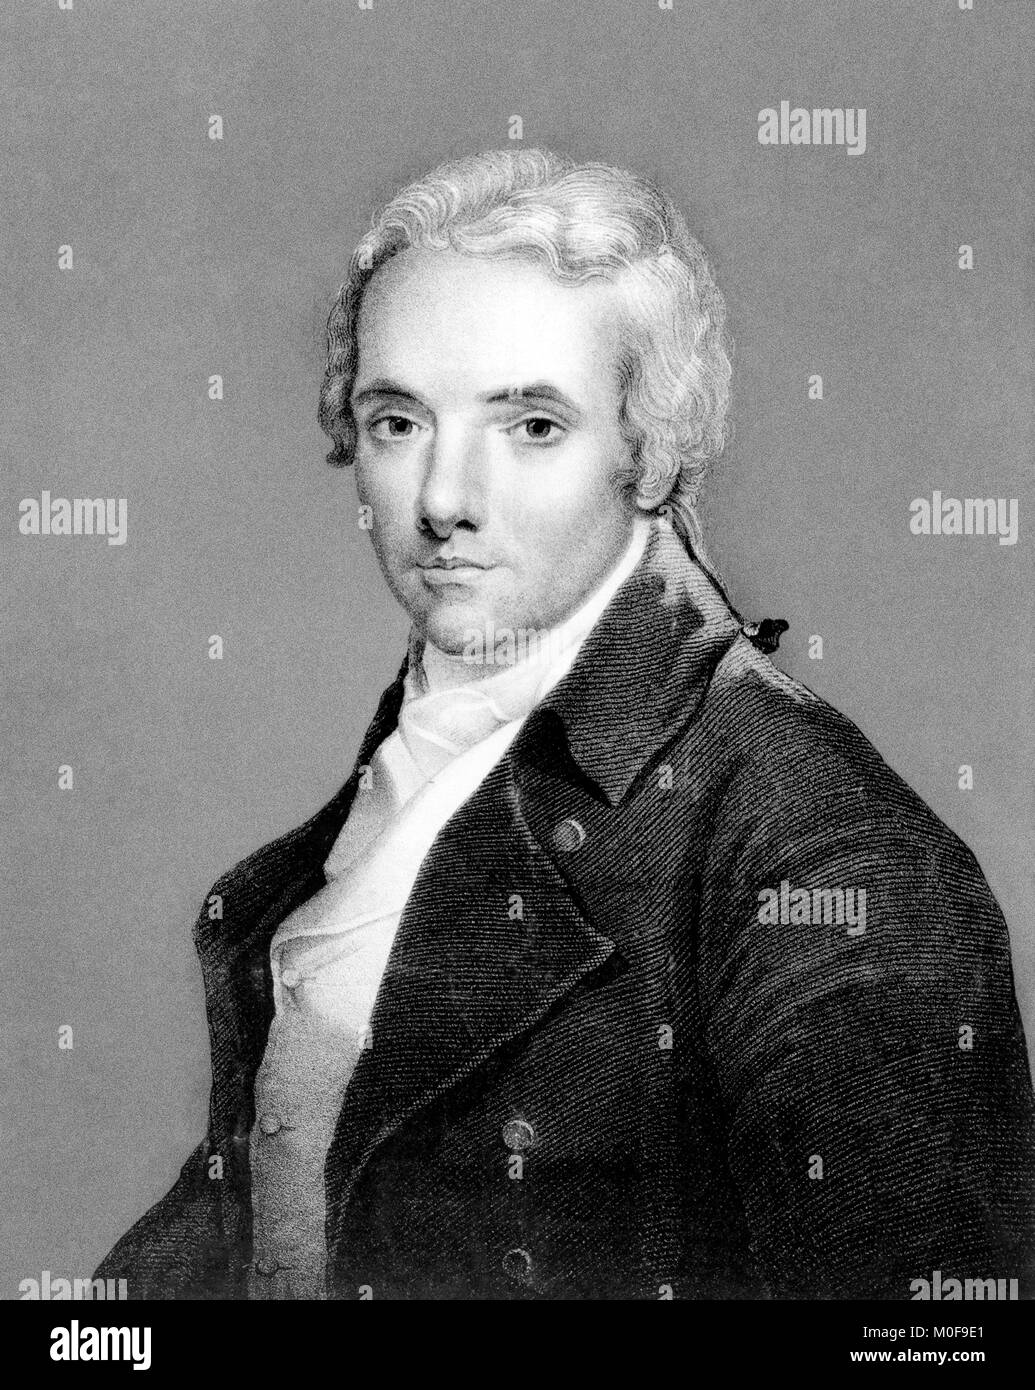 William Wilberforce (1759-1833), an English politician, philanthropist, and a leader of the movement to abolish the slave trade. An 1884 lithograph from an R A Russell painting. Stock Photo